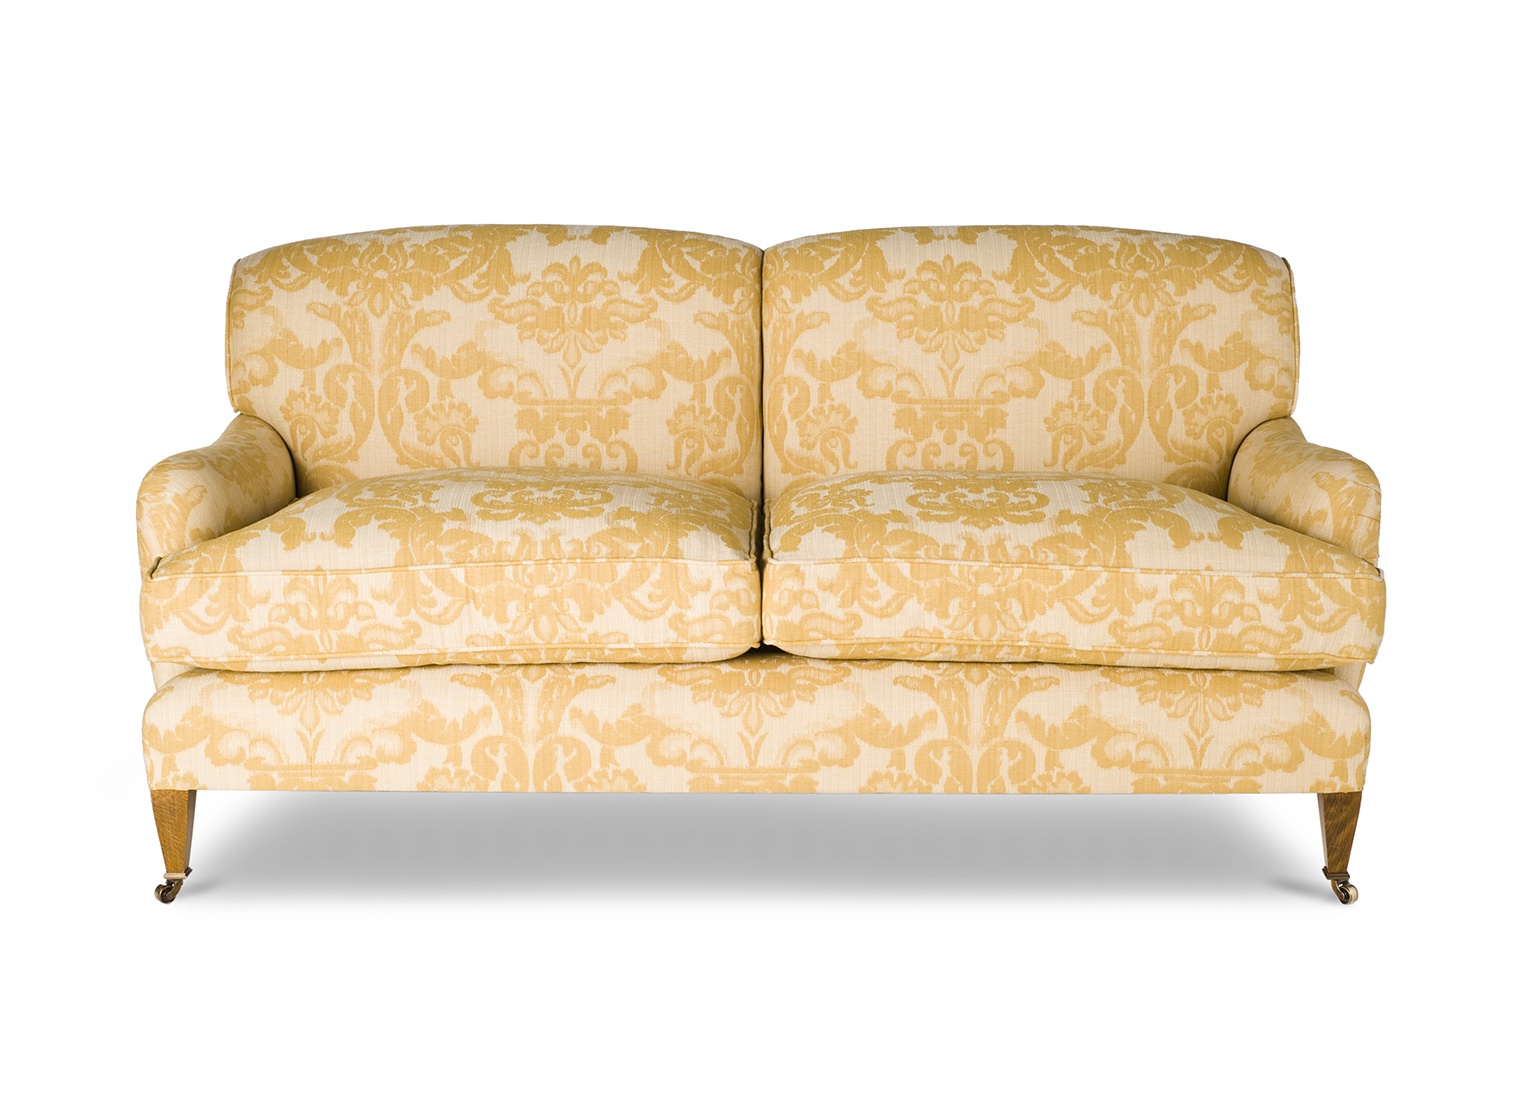 Brooke 2 seater sofa in Wicklow damask - Maize - Beaumont & Fletcher